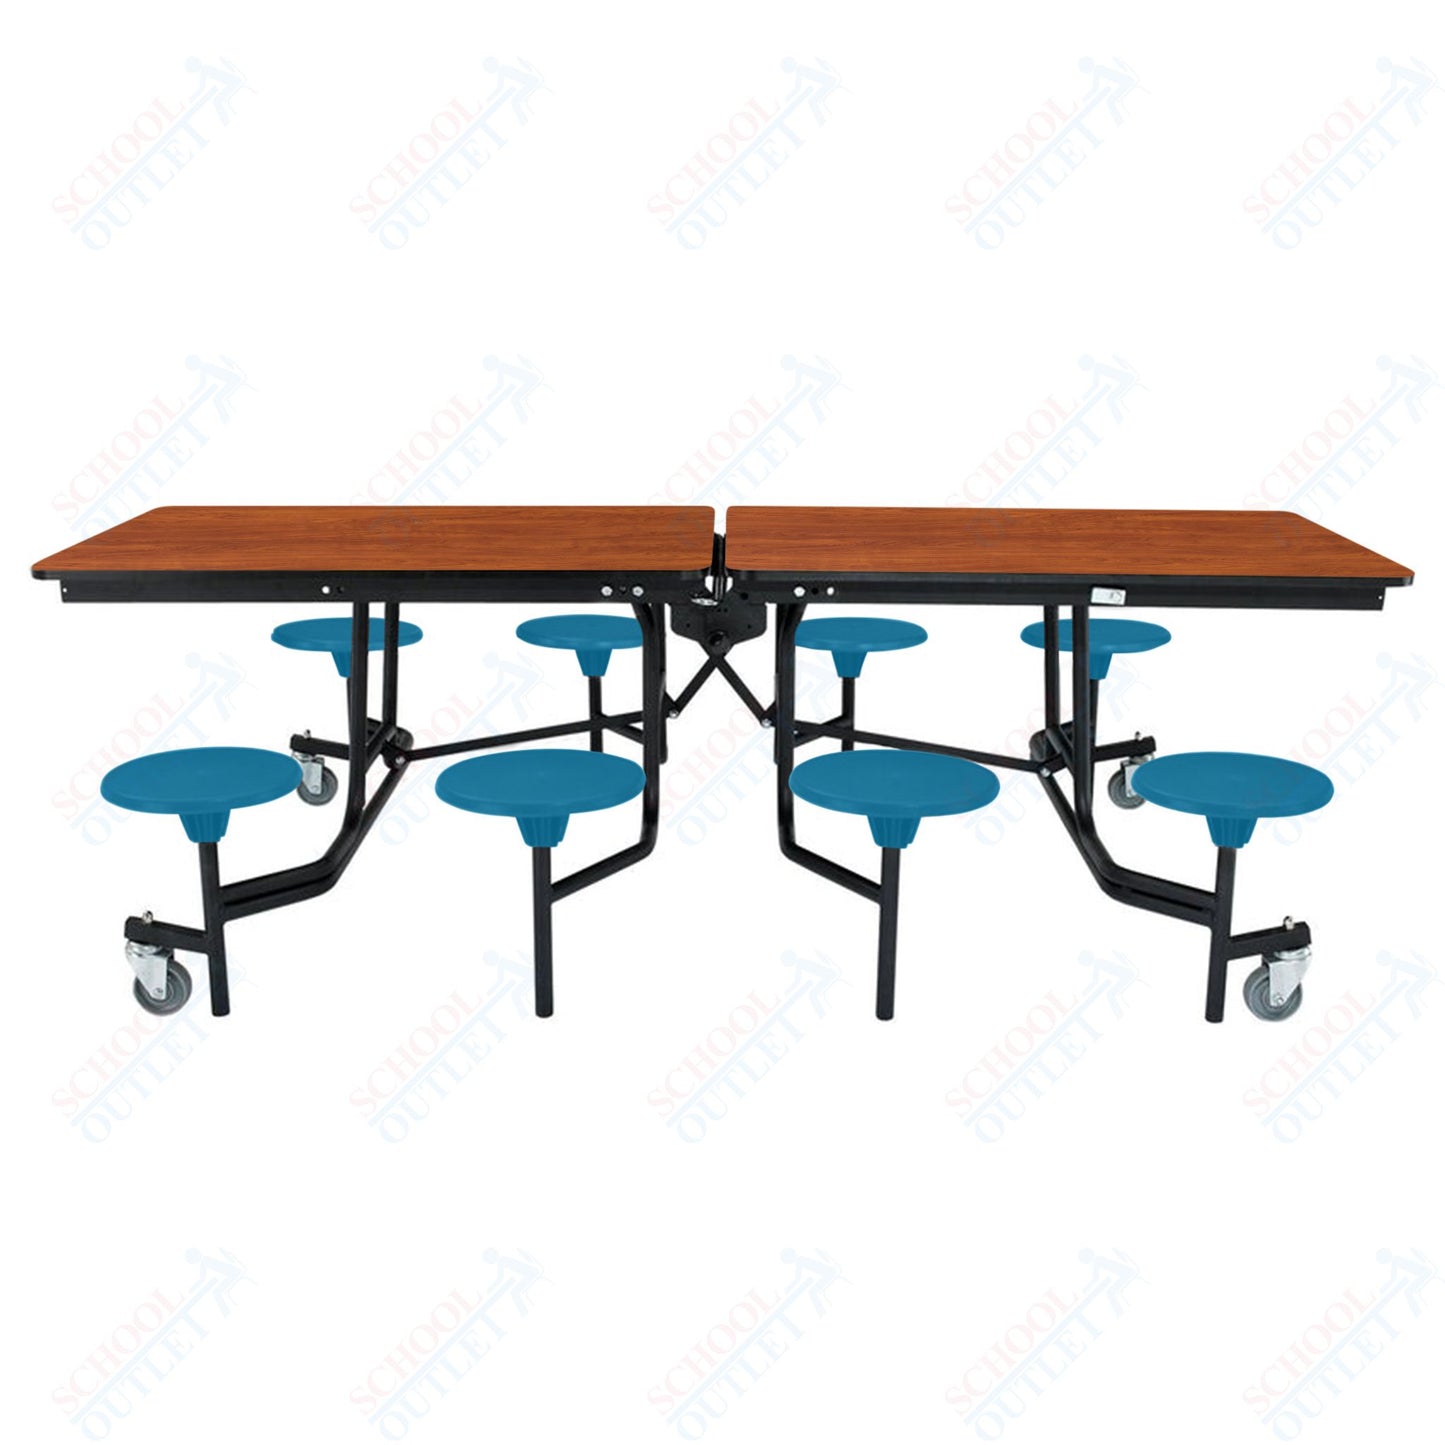 NPS Mobile Cafeteria Table - 30" W x 8' L - 8 Stools - Particleboard Core - T-Molding Edge - Chrome Frame